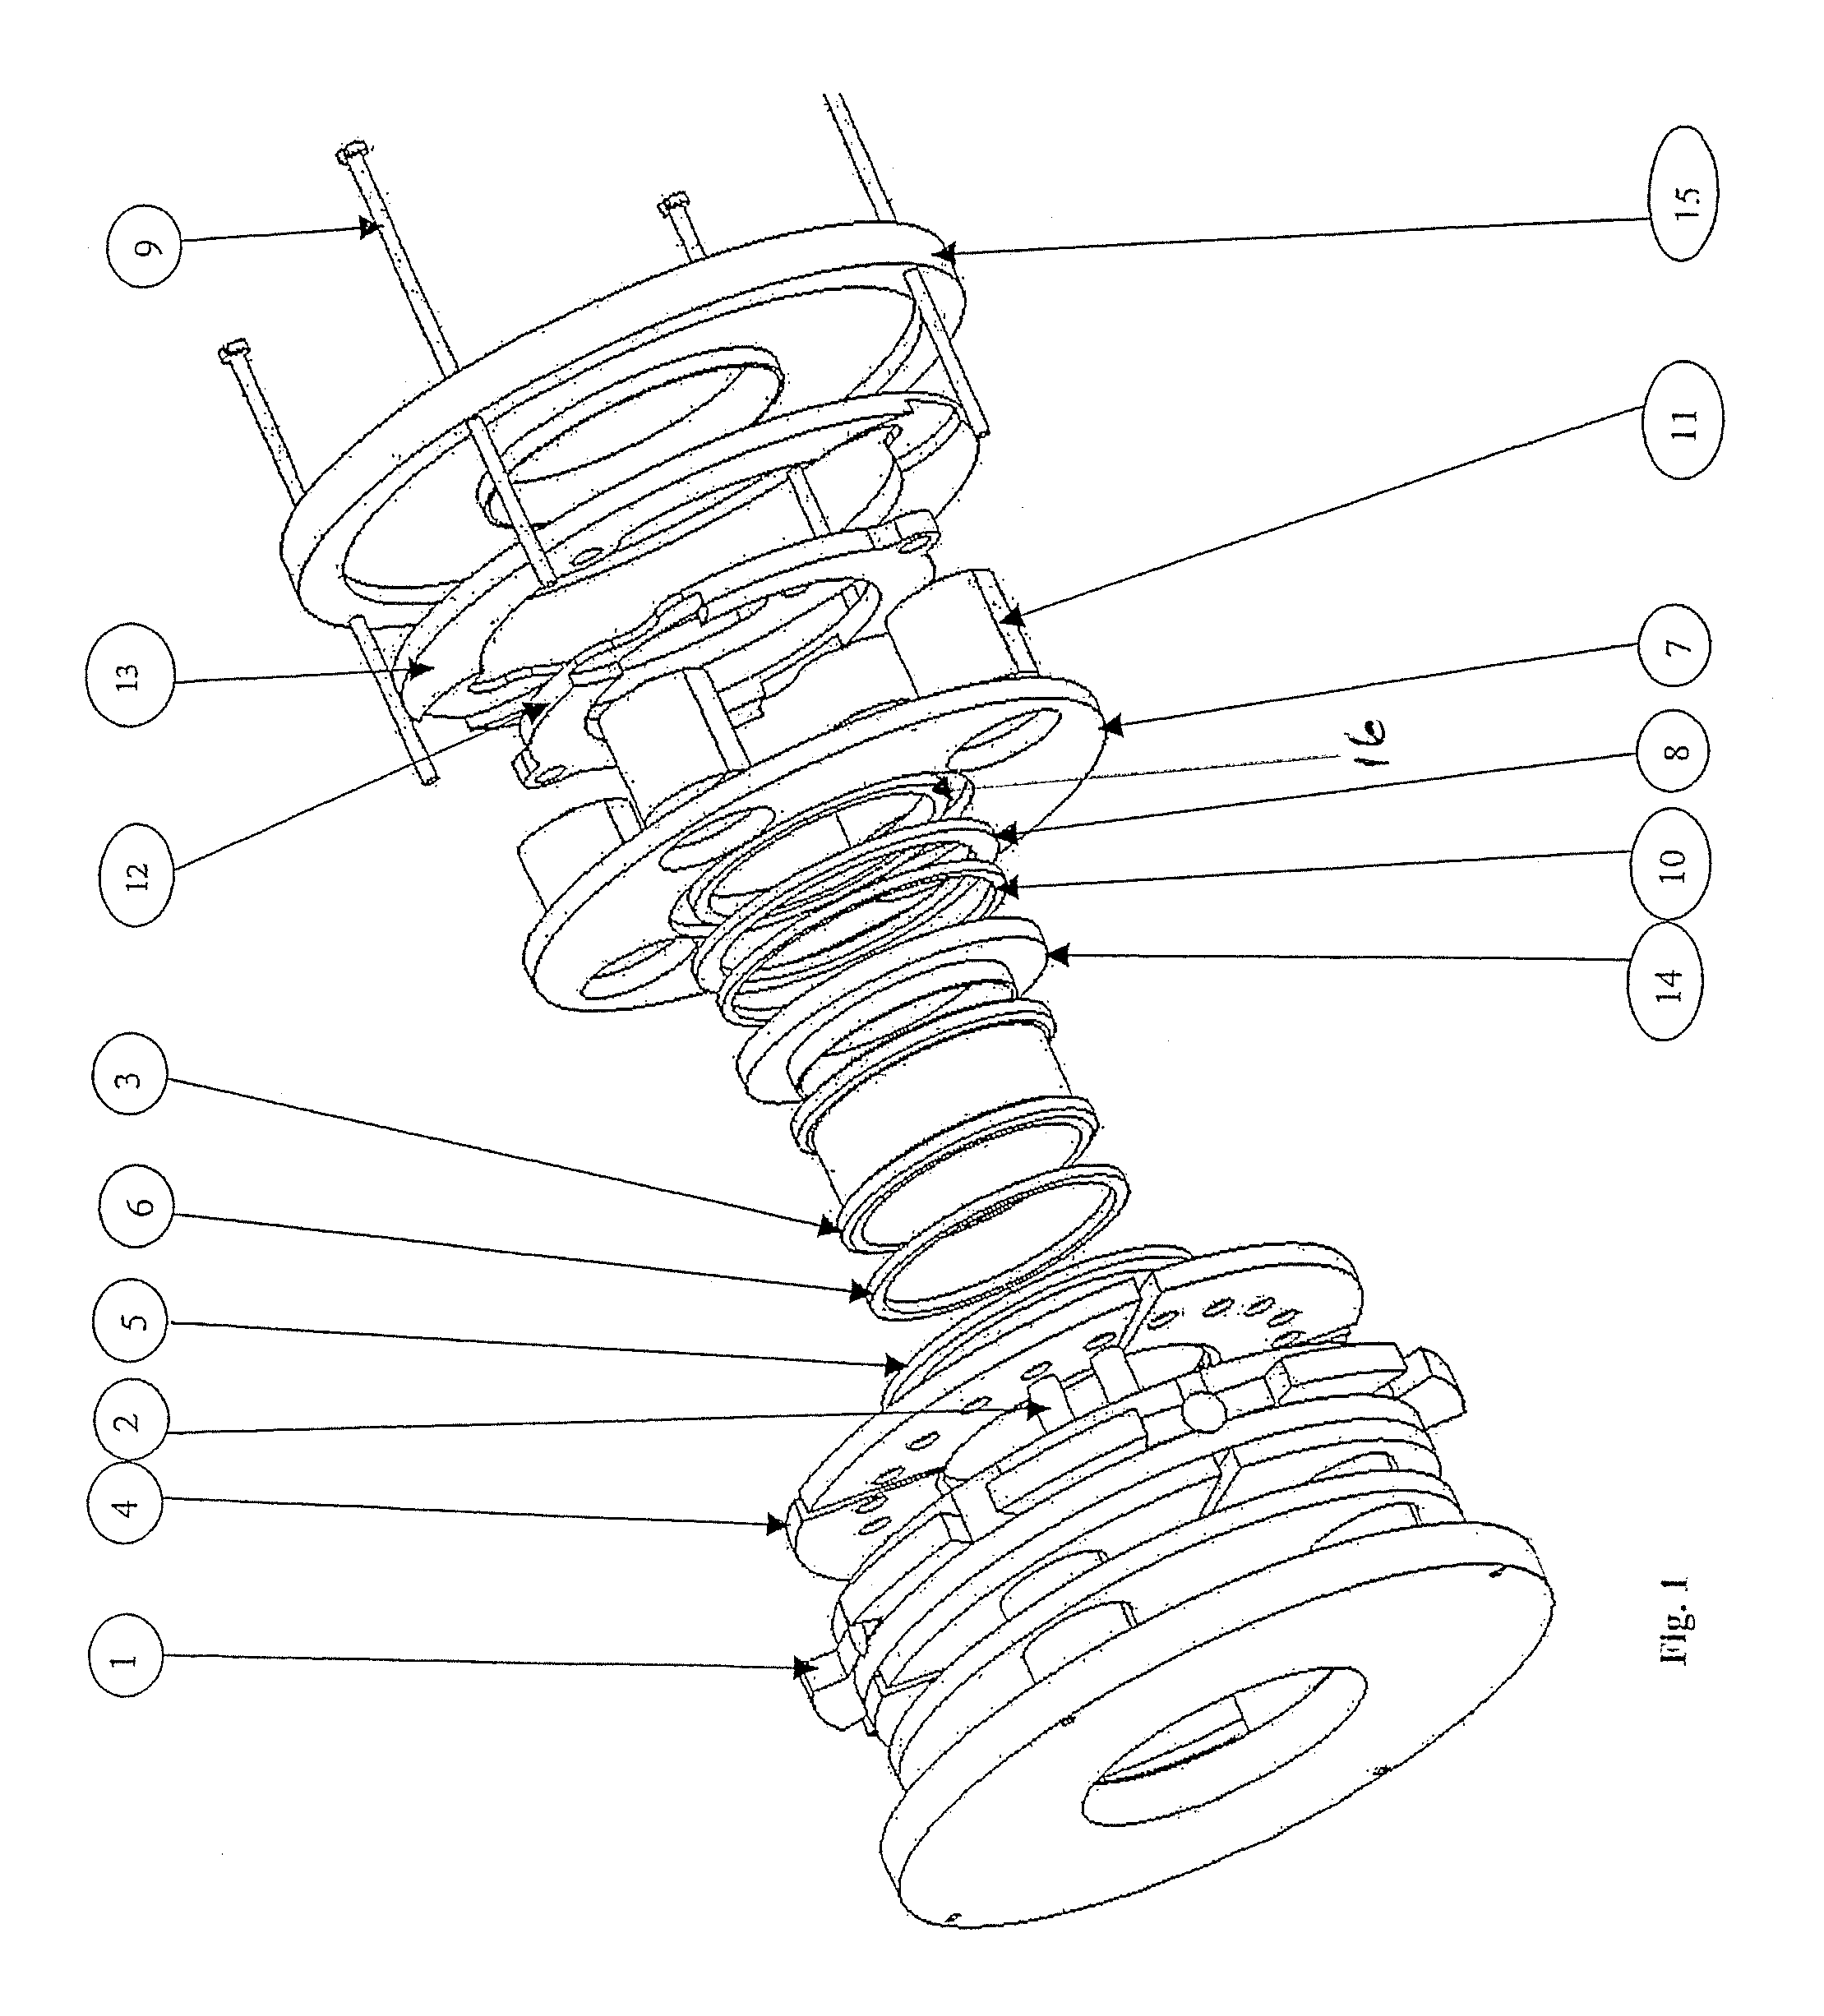 Ring-spinning system for making yarn having a magnetically-elevated ring